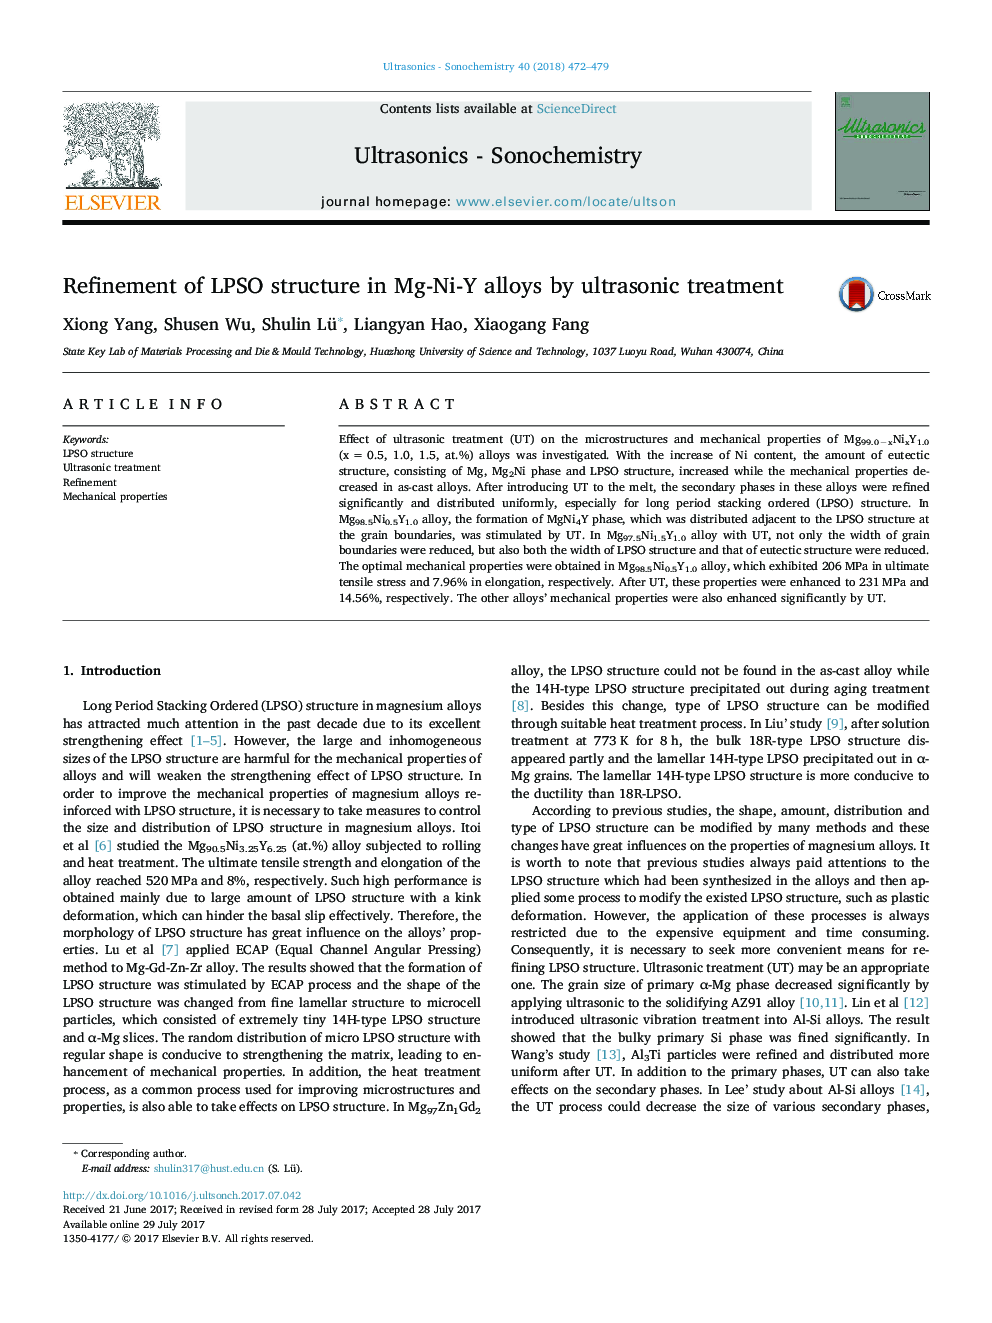 Refinement of LPSO structure in Mg-Ni-Y alloys by ultrasonic treatment